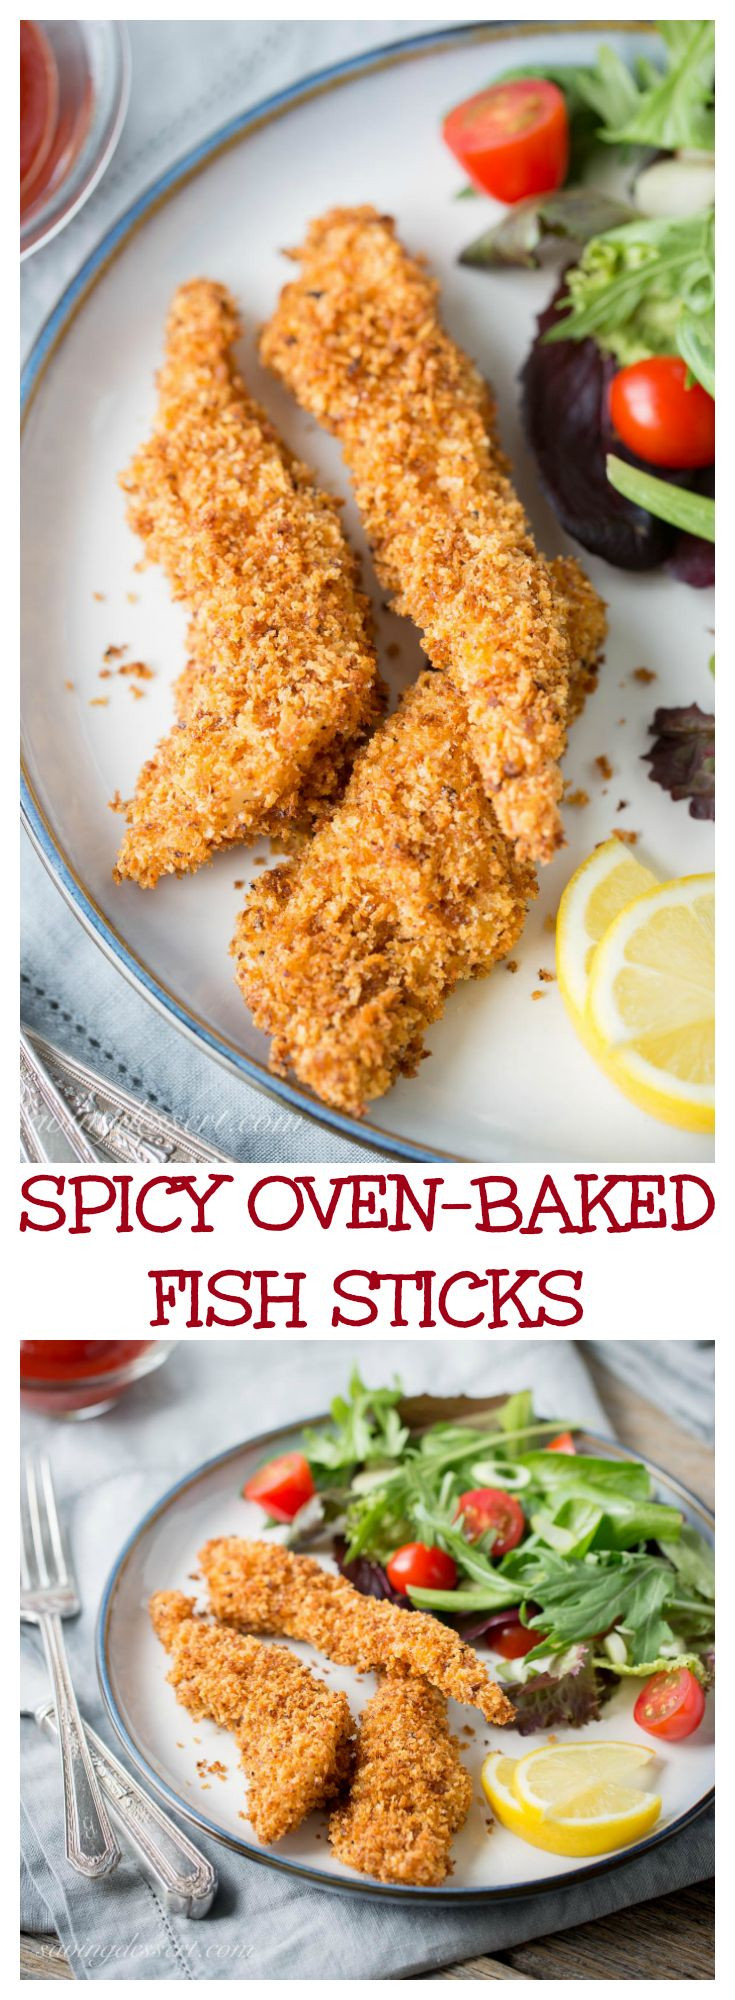 Side Dishes For Fish Sticks
 17 Best images about fish dishes on Pinterest